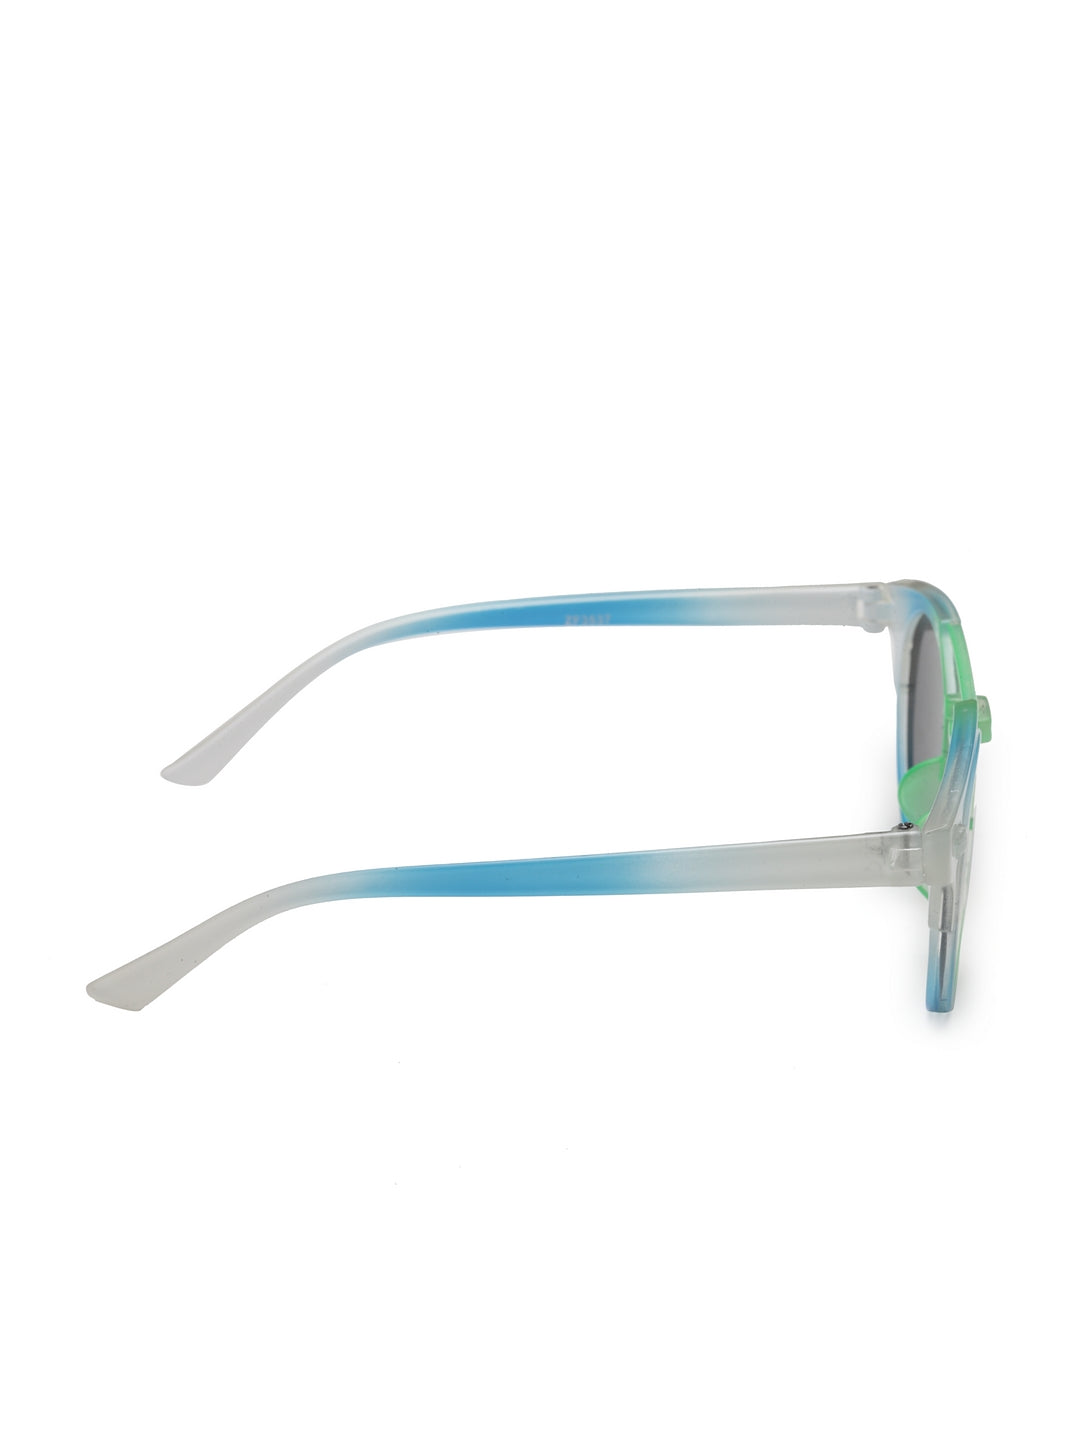 Stol'n Kids Yellow and Blue Bow Applique Rectangular Sunglasses:Yellow and Blue Pink and Blue